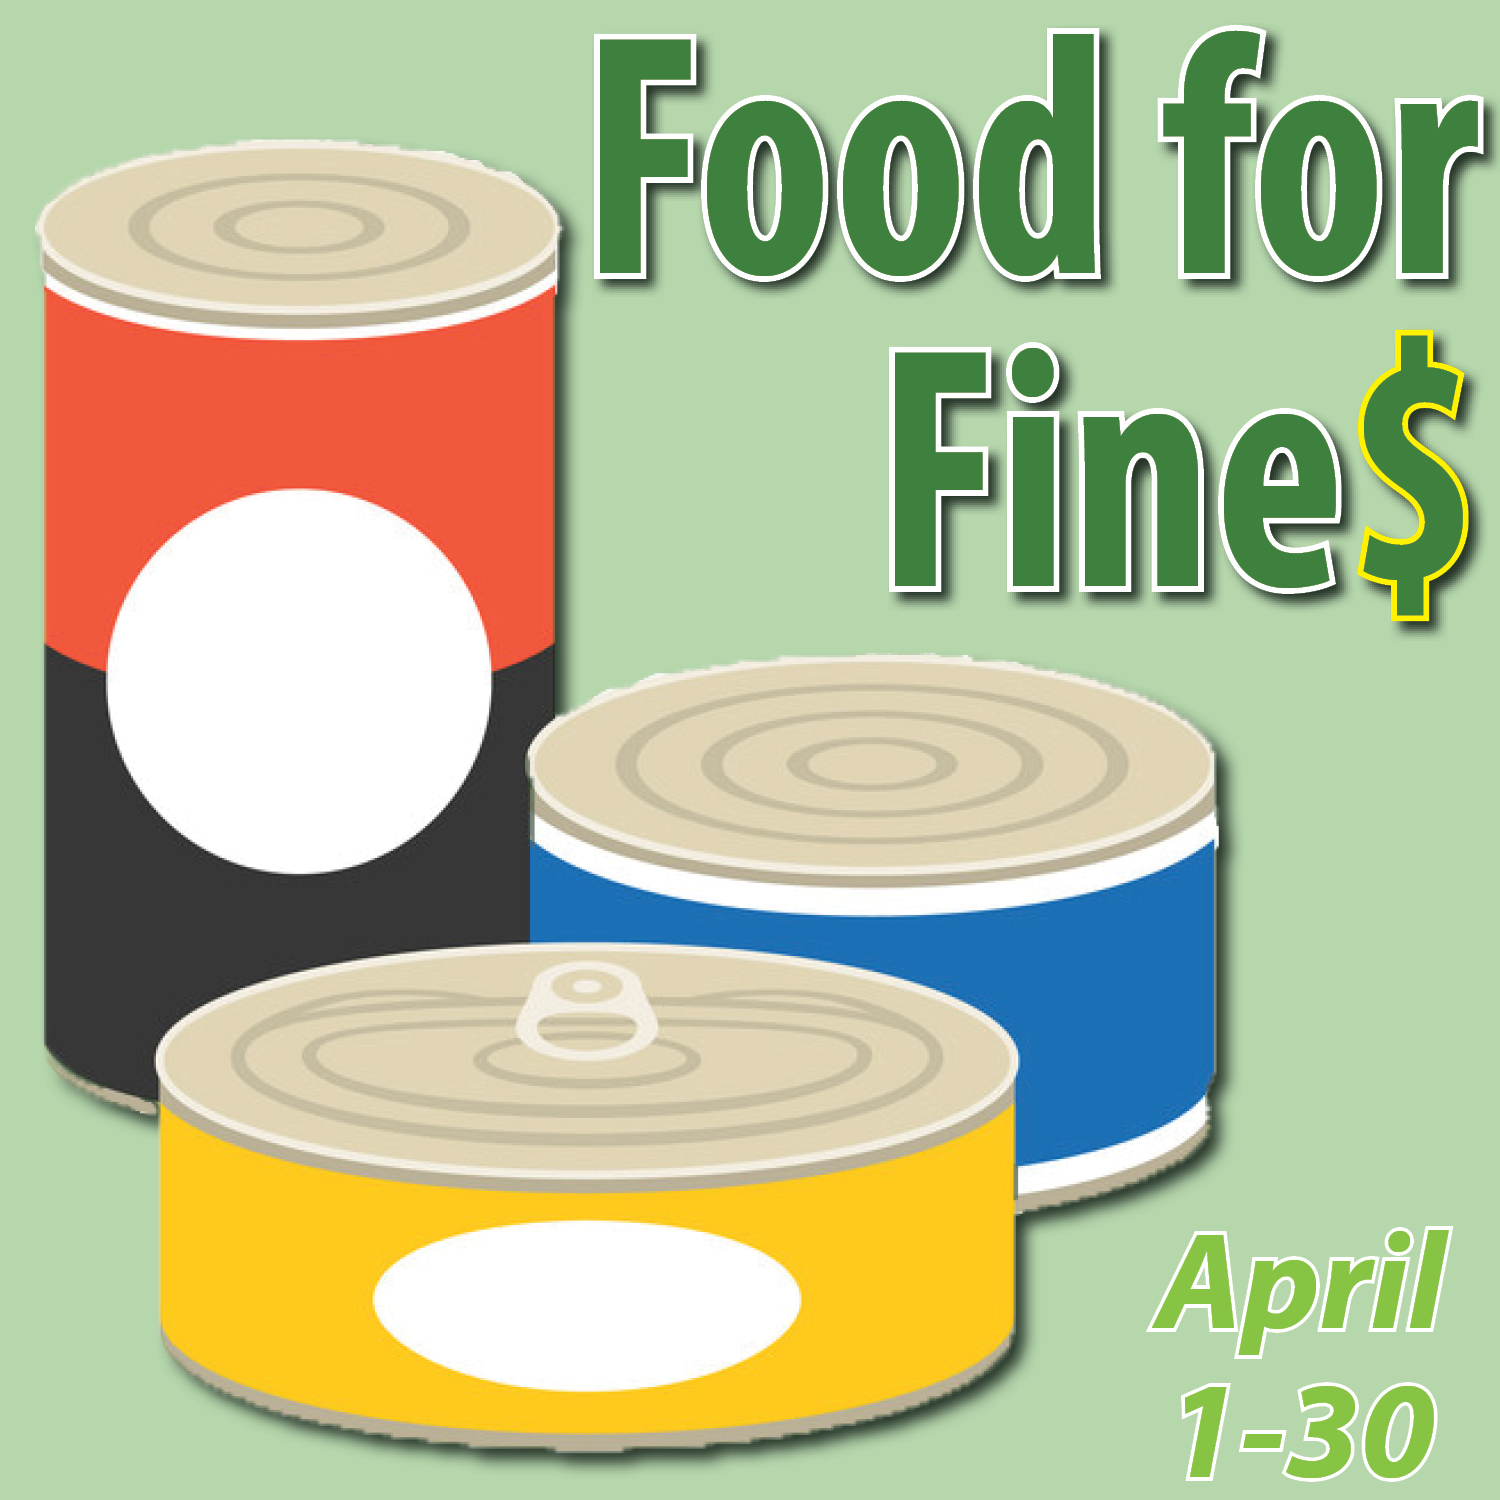 Food for Fines returns to FDLPL in April 